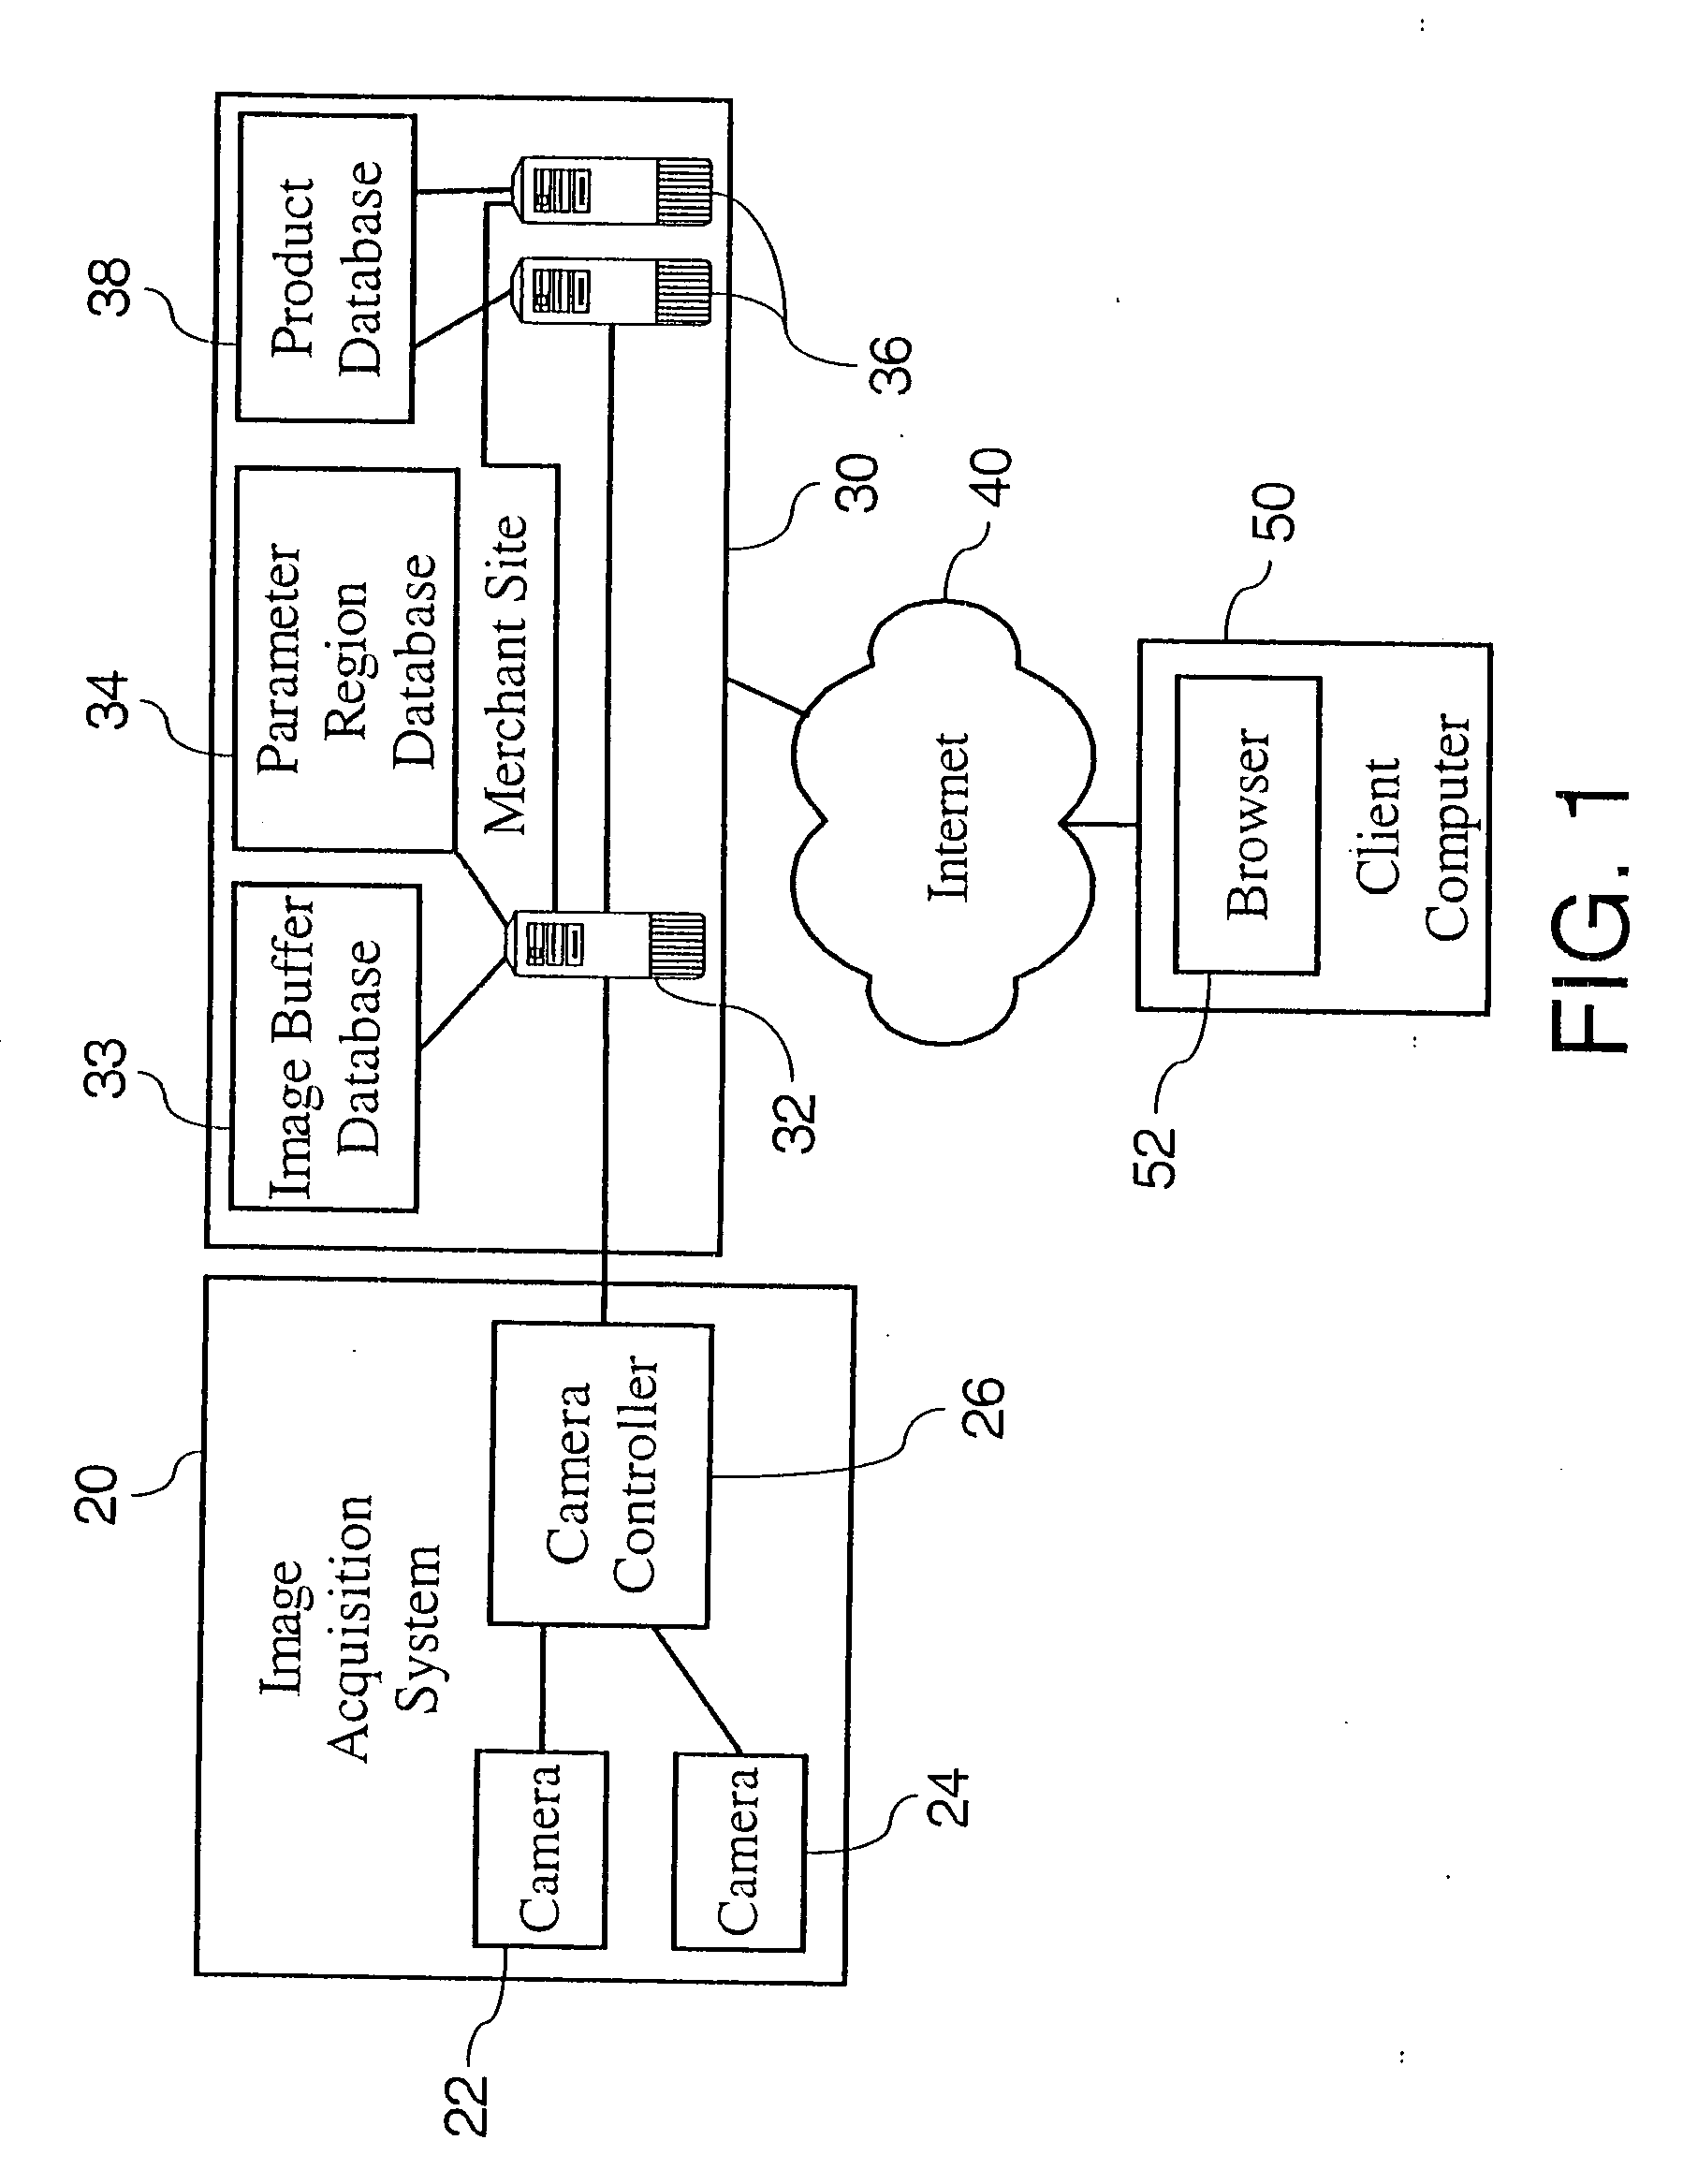 Method and apparatus for remote location shopping over a computer network